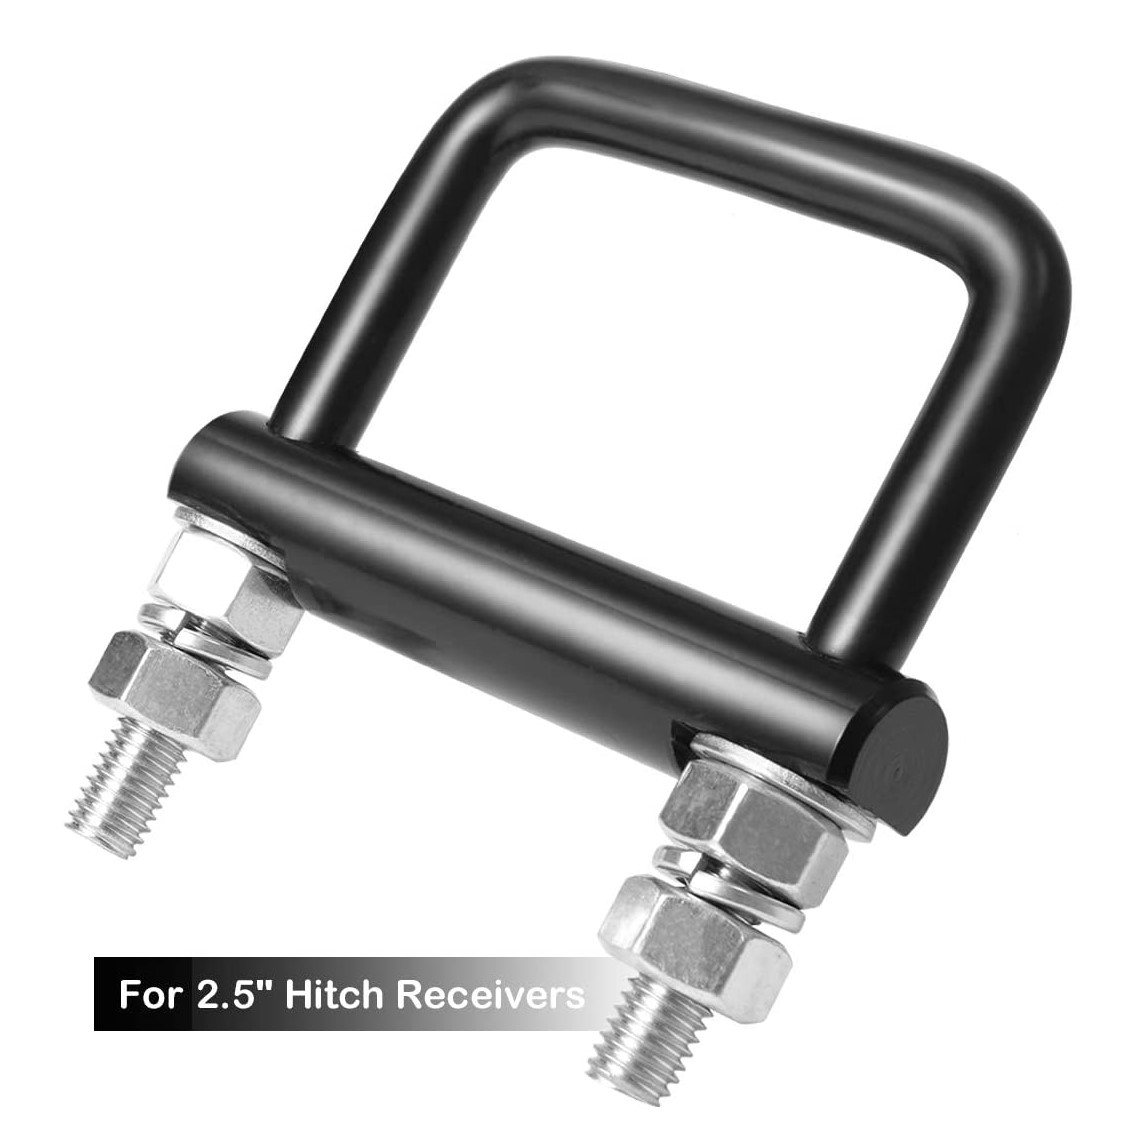 102055 Cross Clamp Anti-Rattle Stabilizer Hitch Tightener For 2-1/2 Inch Hitches Featured Image